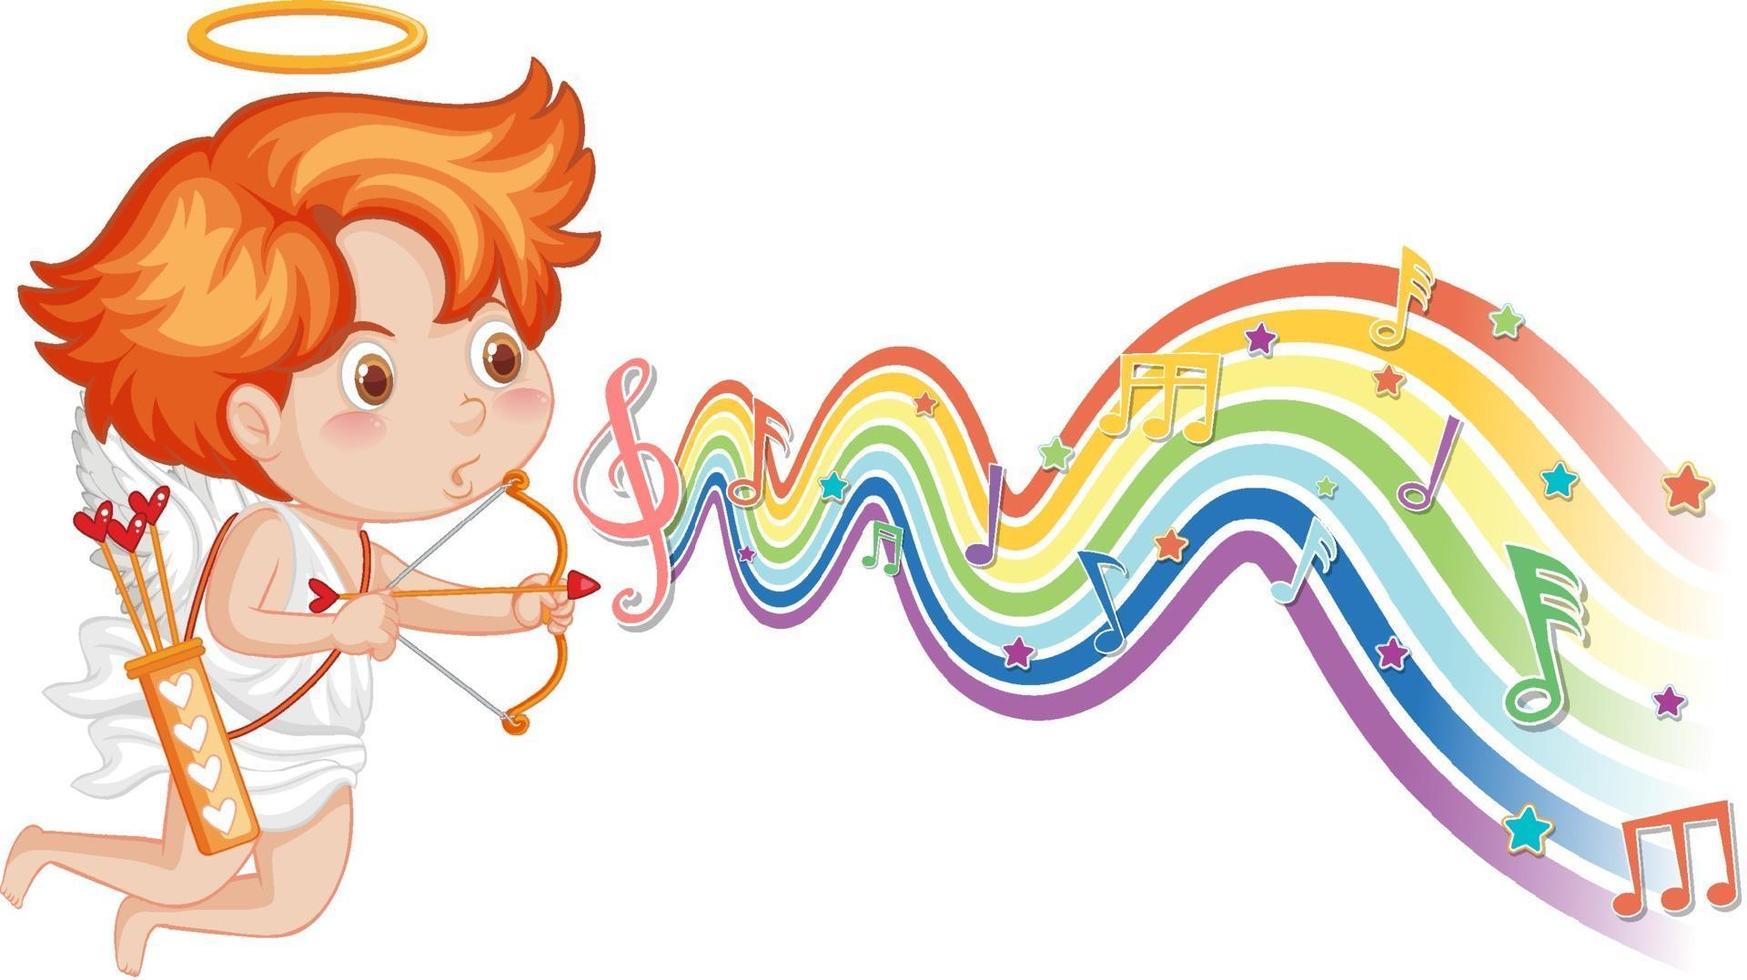 Cupid holding bow and arrow with melody symbols on rainbow wave vector